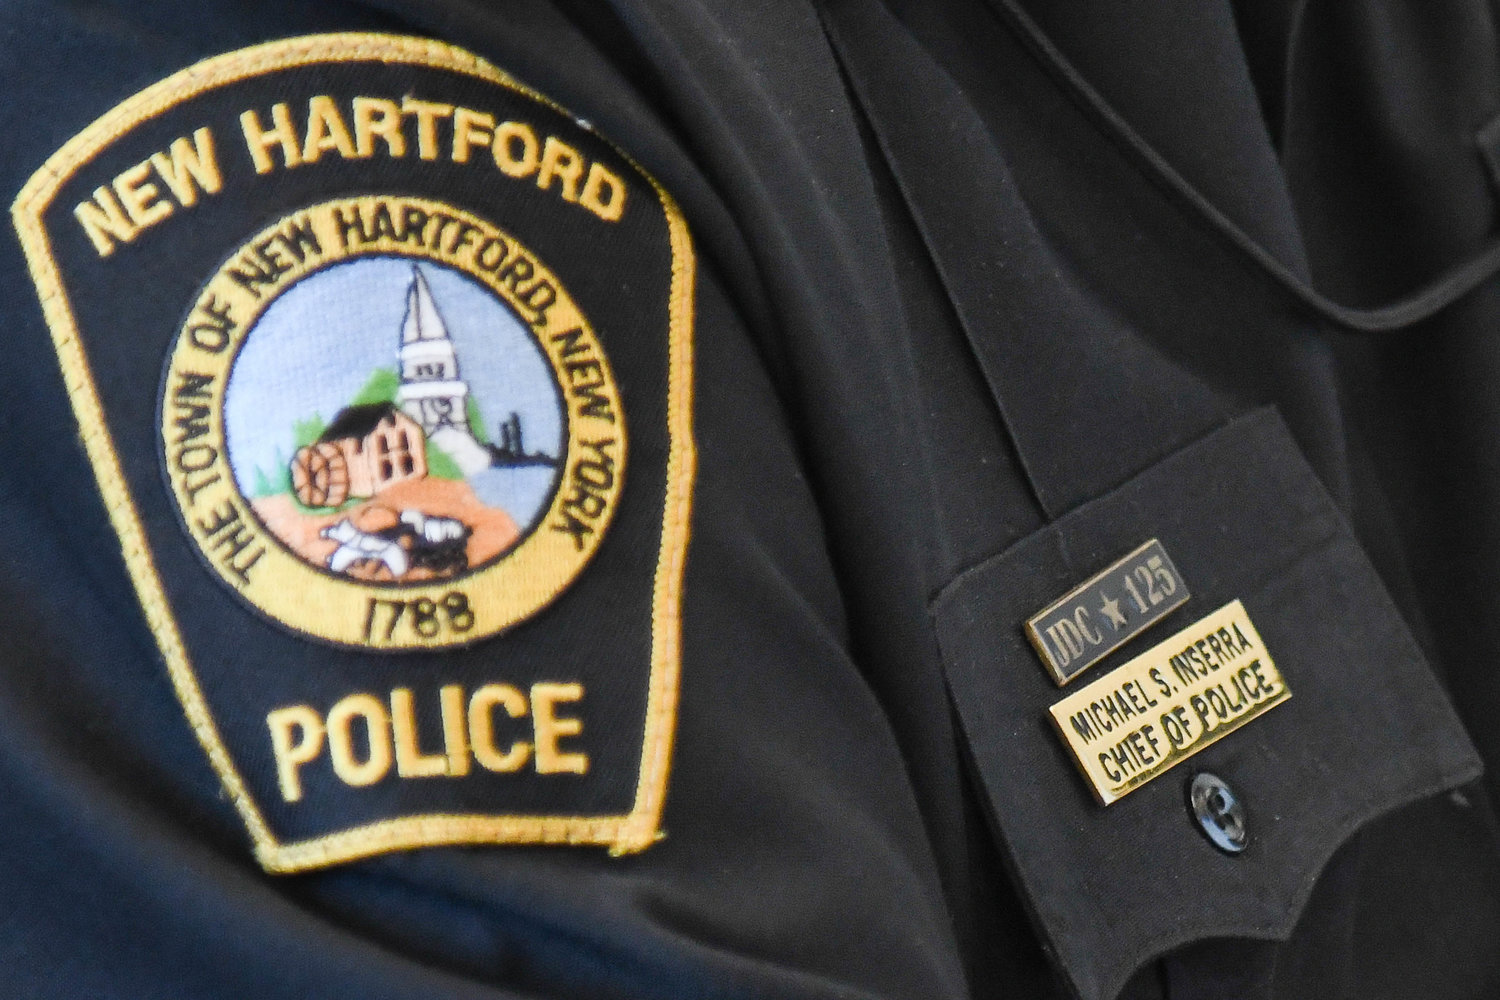 Michael Inserra will be retiring and stepping down as Chief of Police for the Town of New Hartford later this month. He has been with the department since 1988, and has served as chief since 2010.